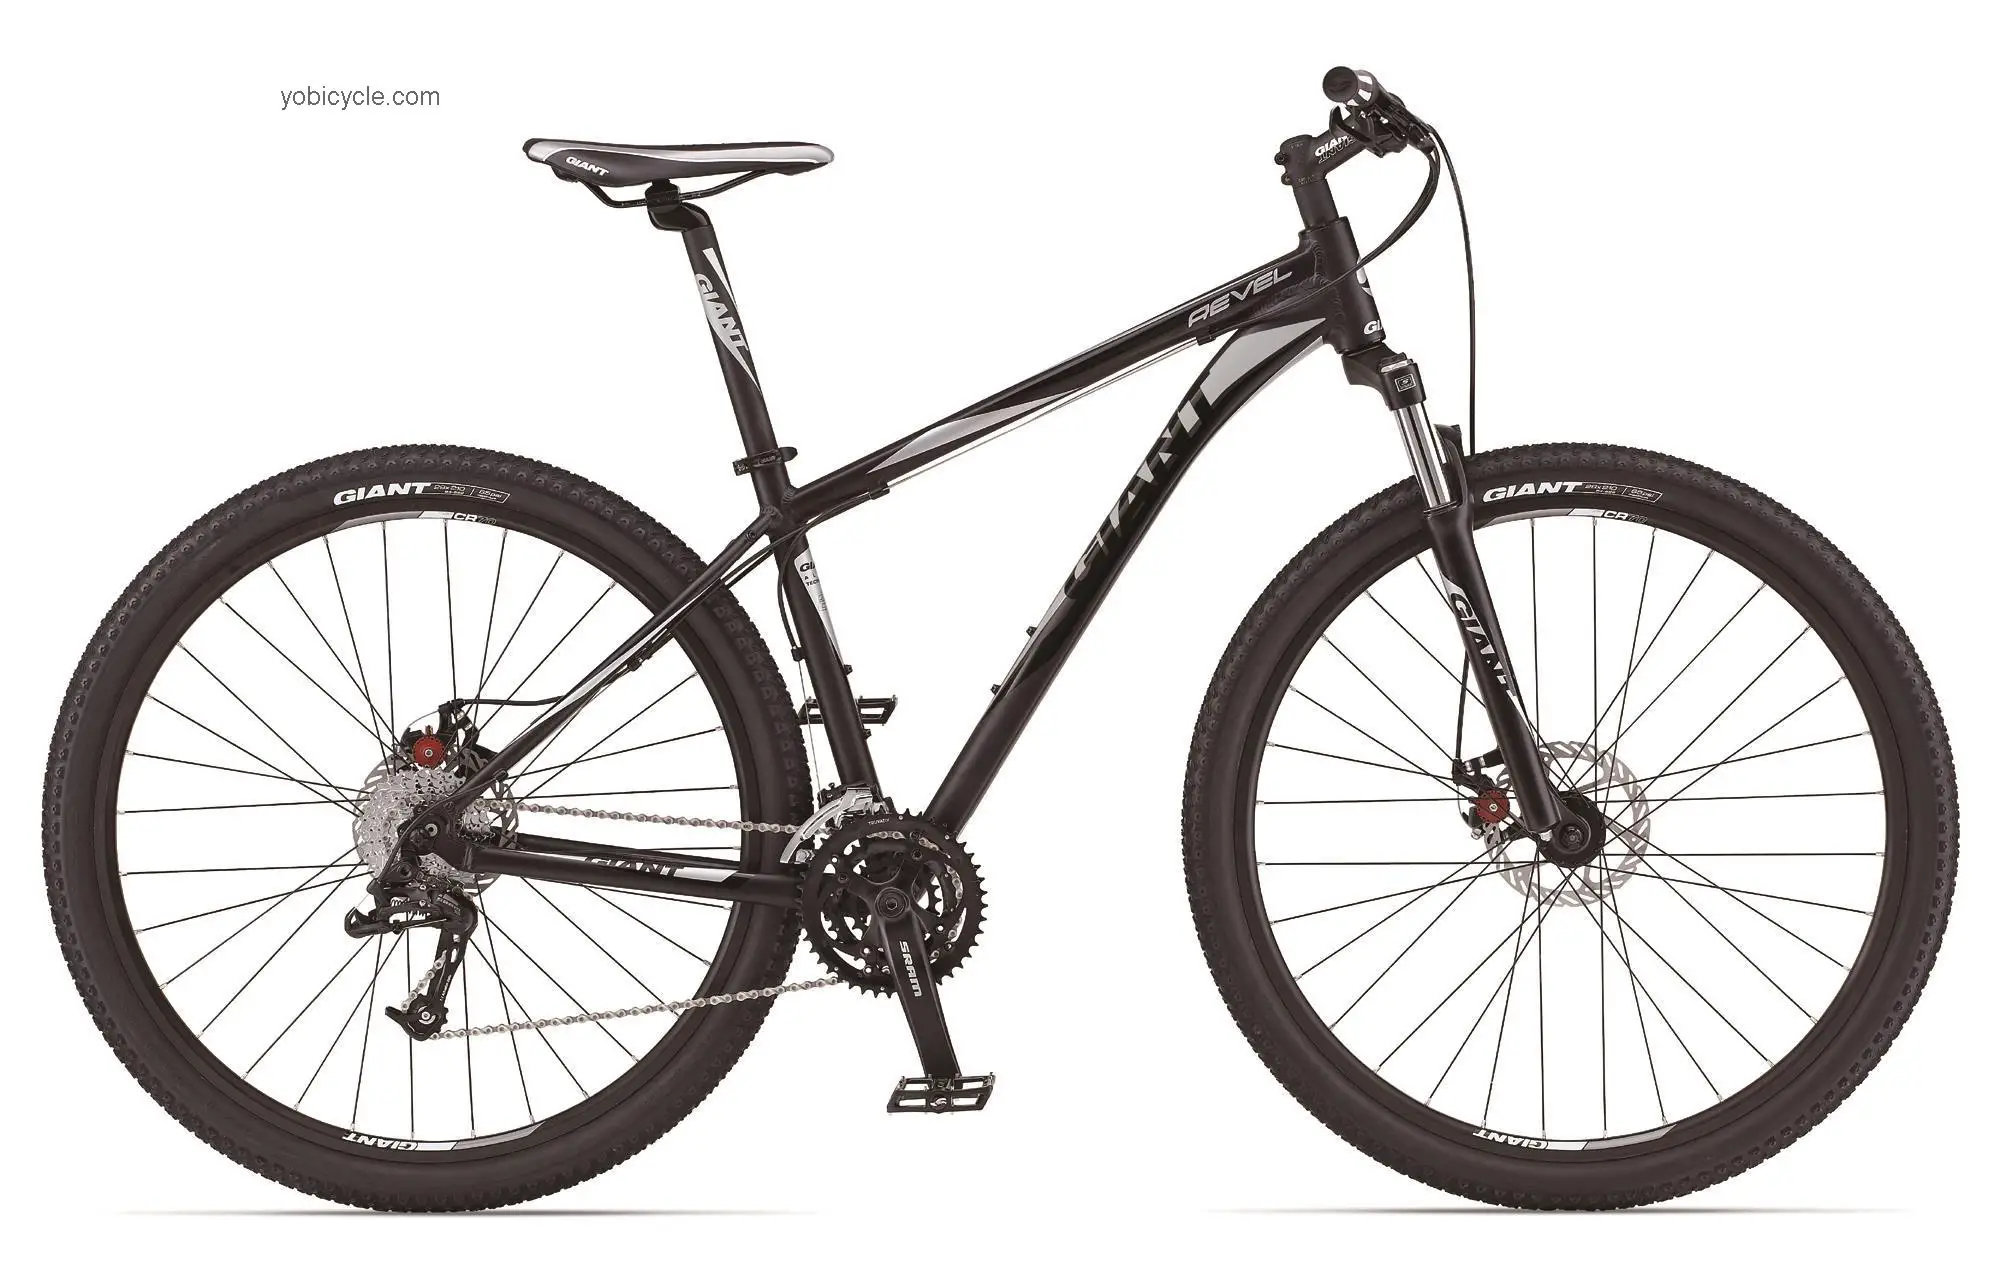 Giant Revel 29er 0 2013 comparison online with competitors